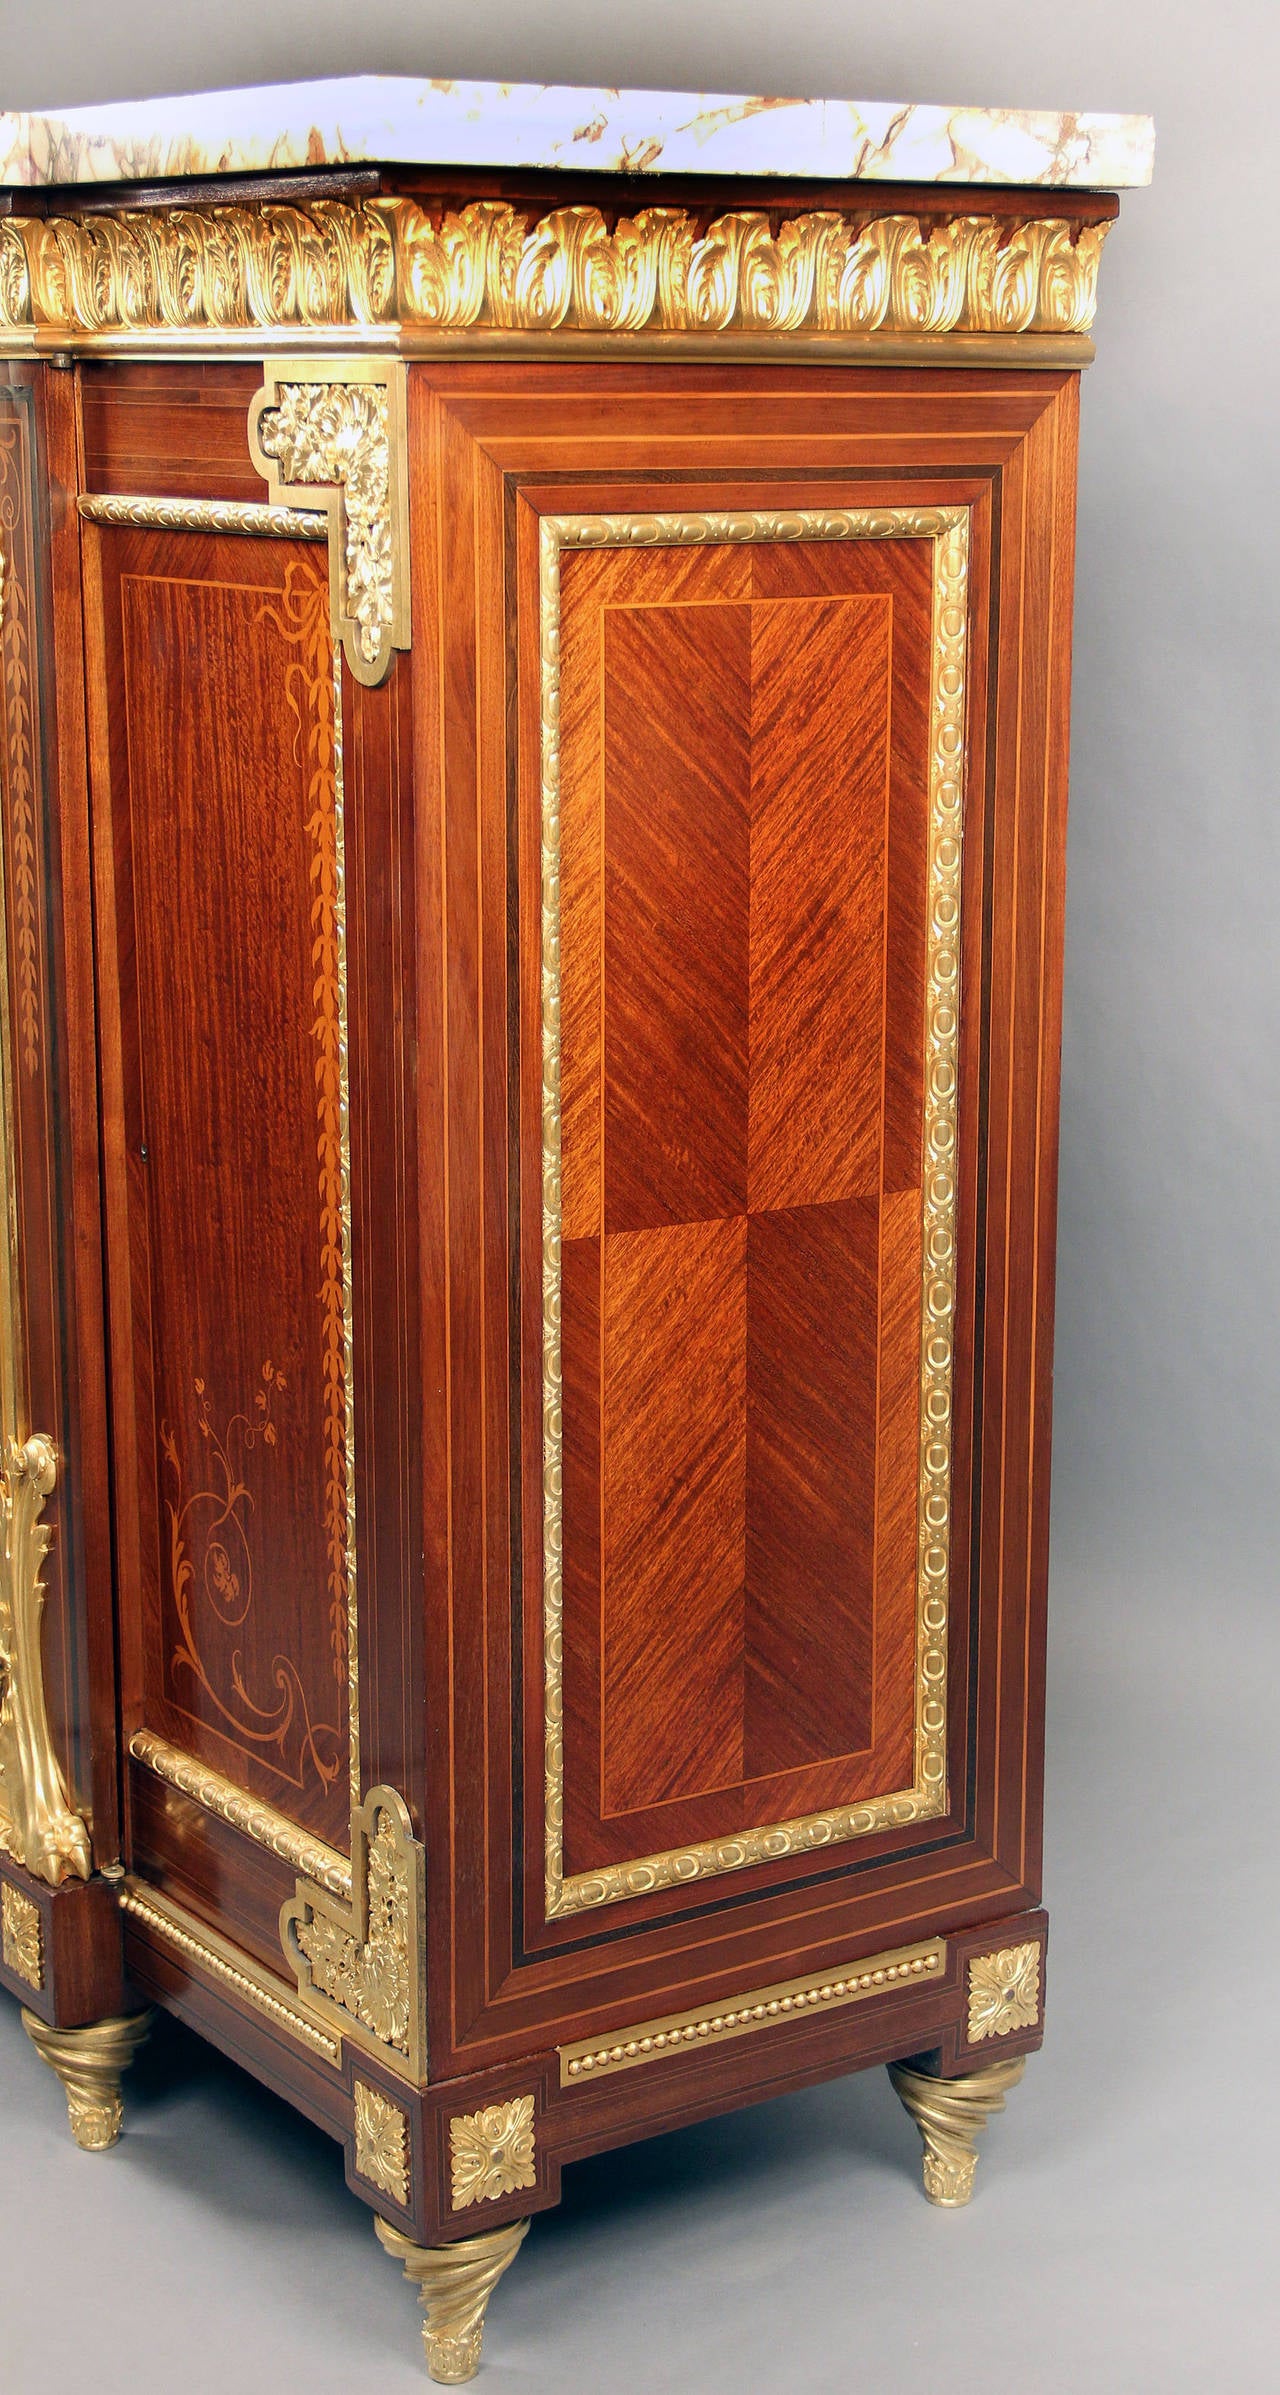 Rare Late 19th Century Gilt Bronze-Mounted Marquetry Cabinet For Sale 4